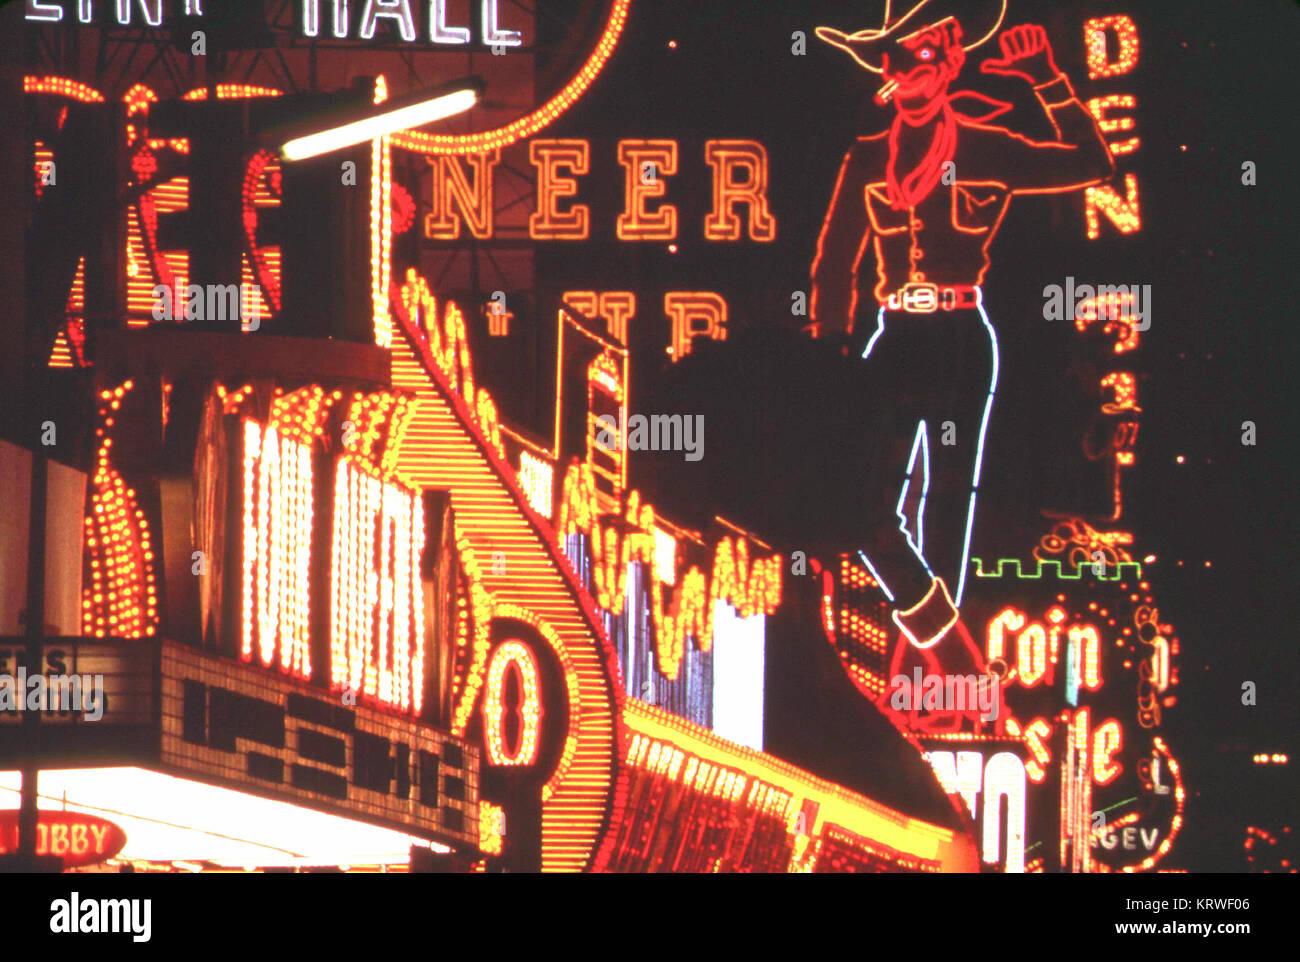 Lots of neon lights on an early 1970s evening in Las Vegas, Nevada (Old neon cowboy sign) Stock Photo